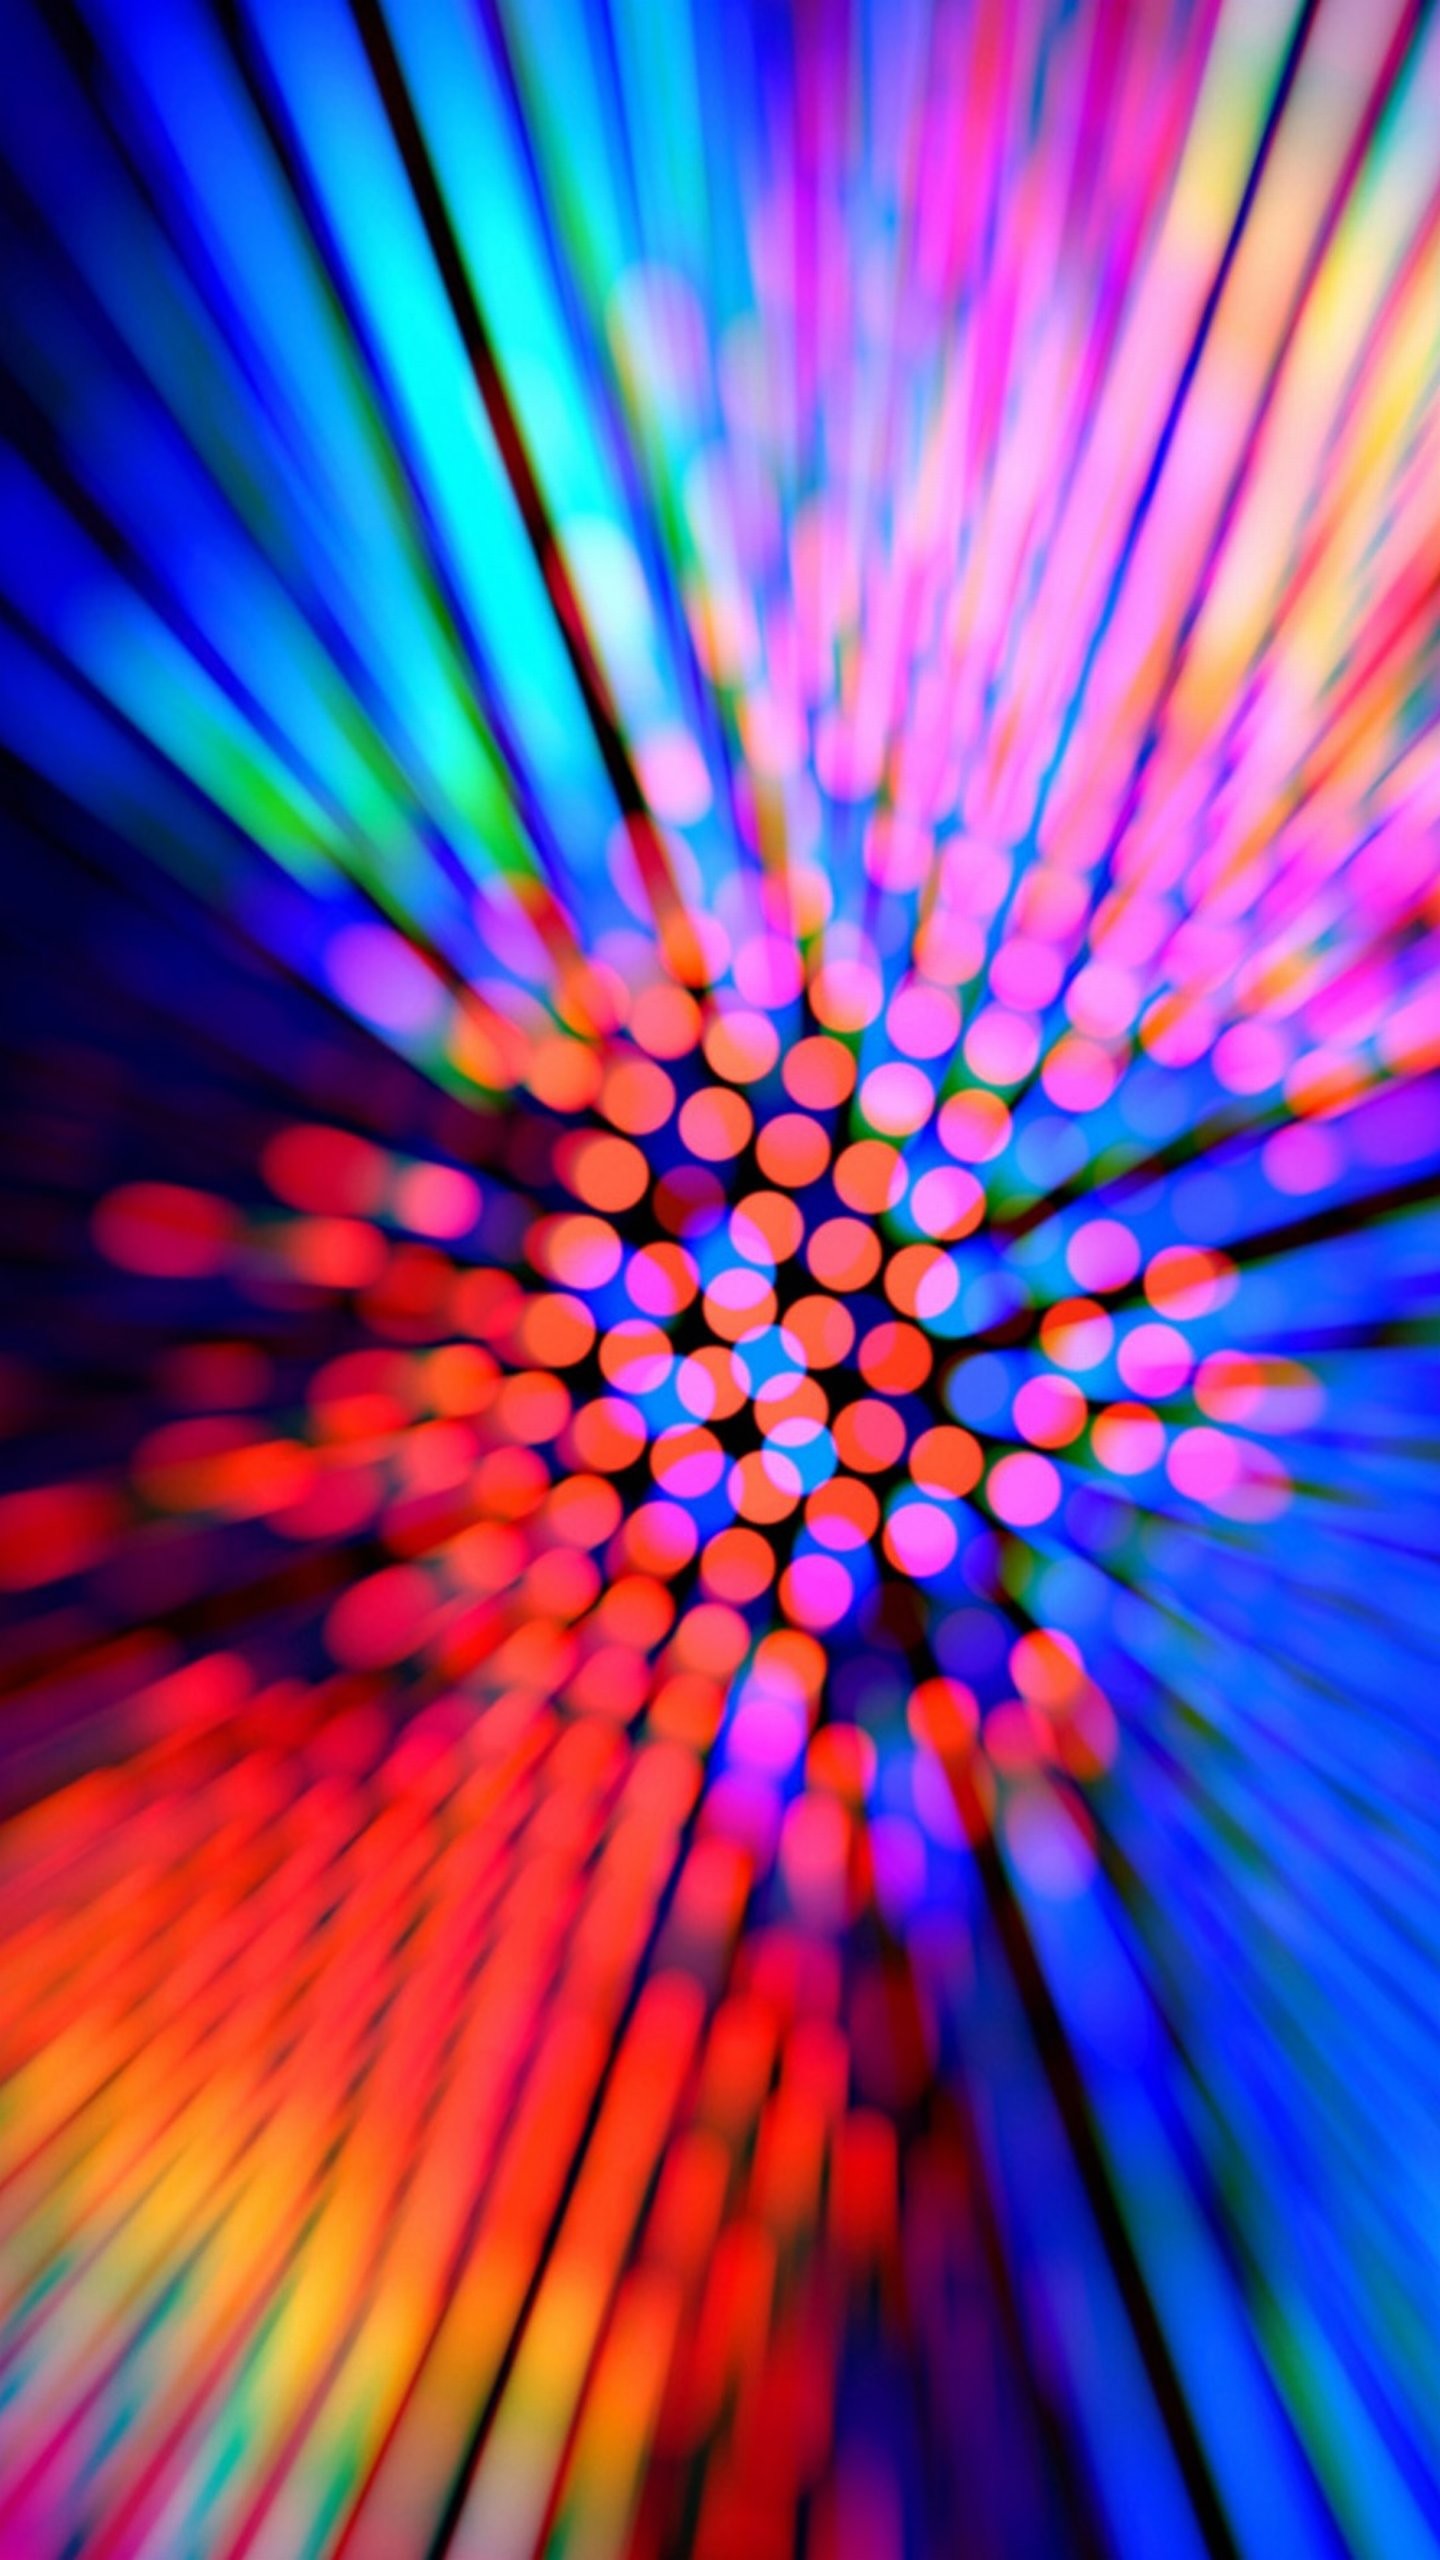 1440x2560 Wallpaper Lg G4 Speed Colors Abstract 1440 2560.